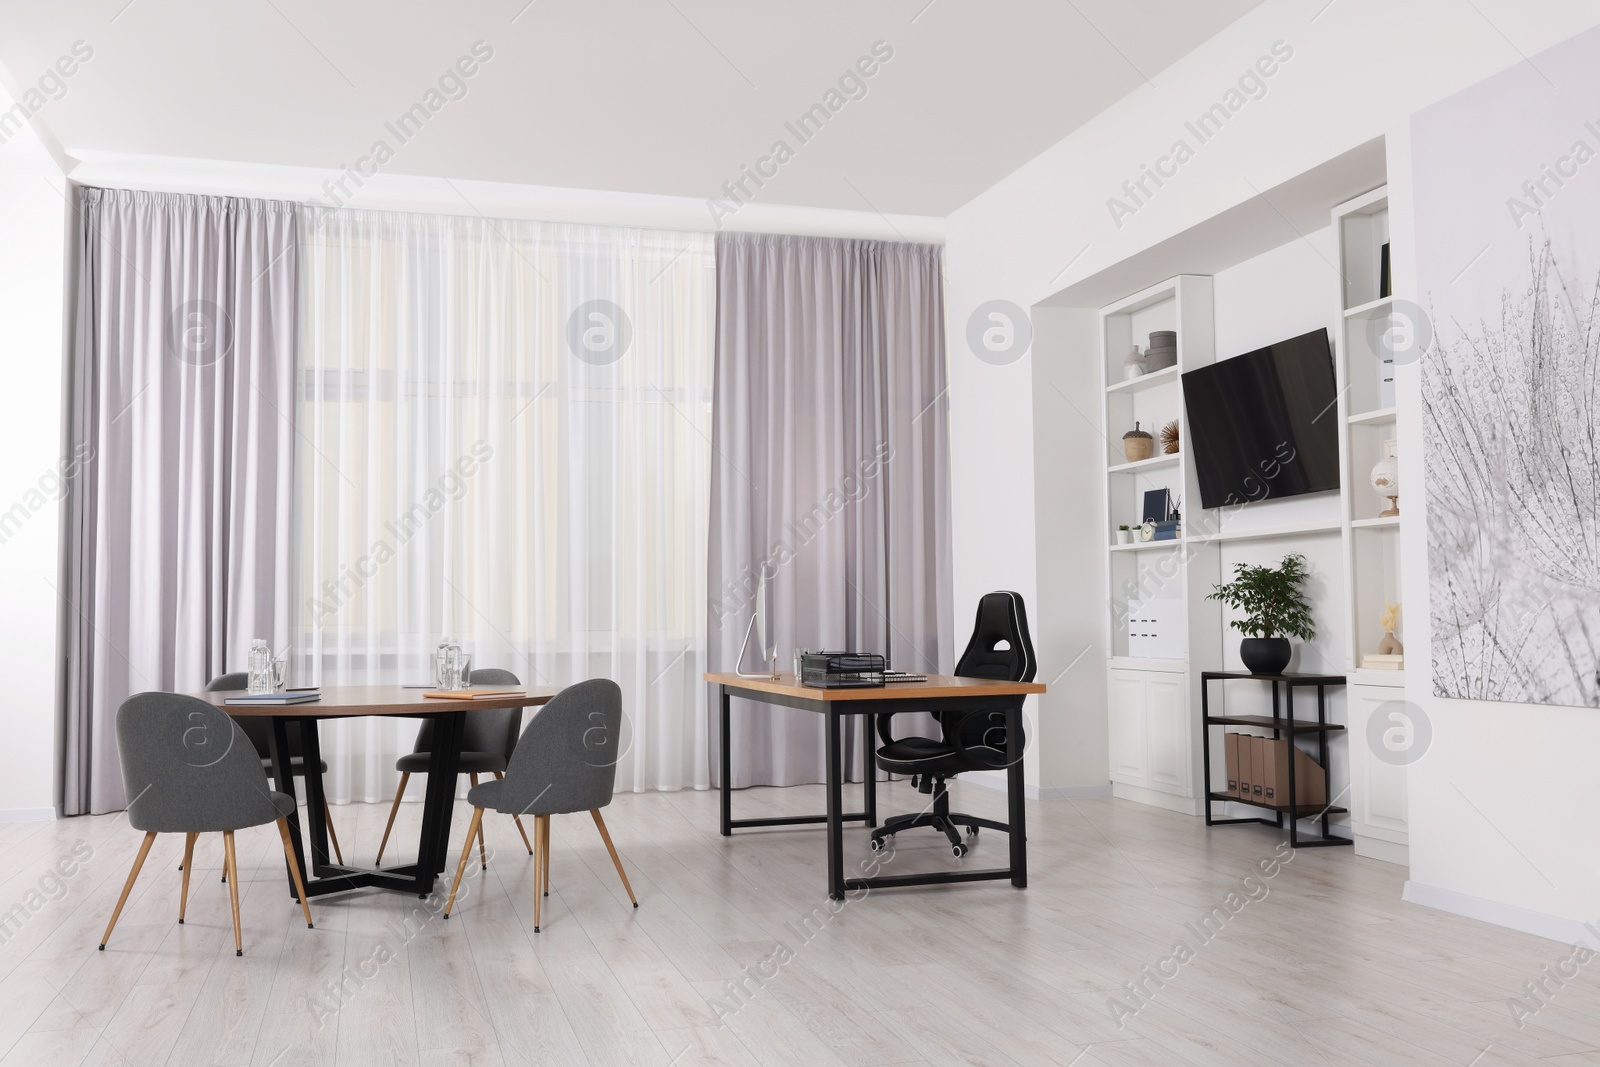 Photo of Stylish director's workplace with comfortable furniture and tv zone in room. Interior design